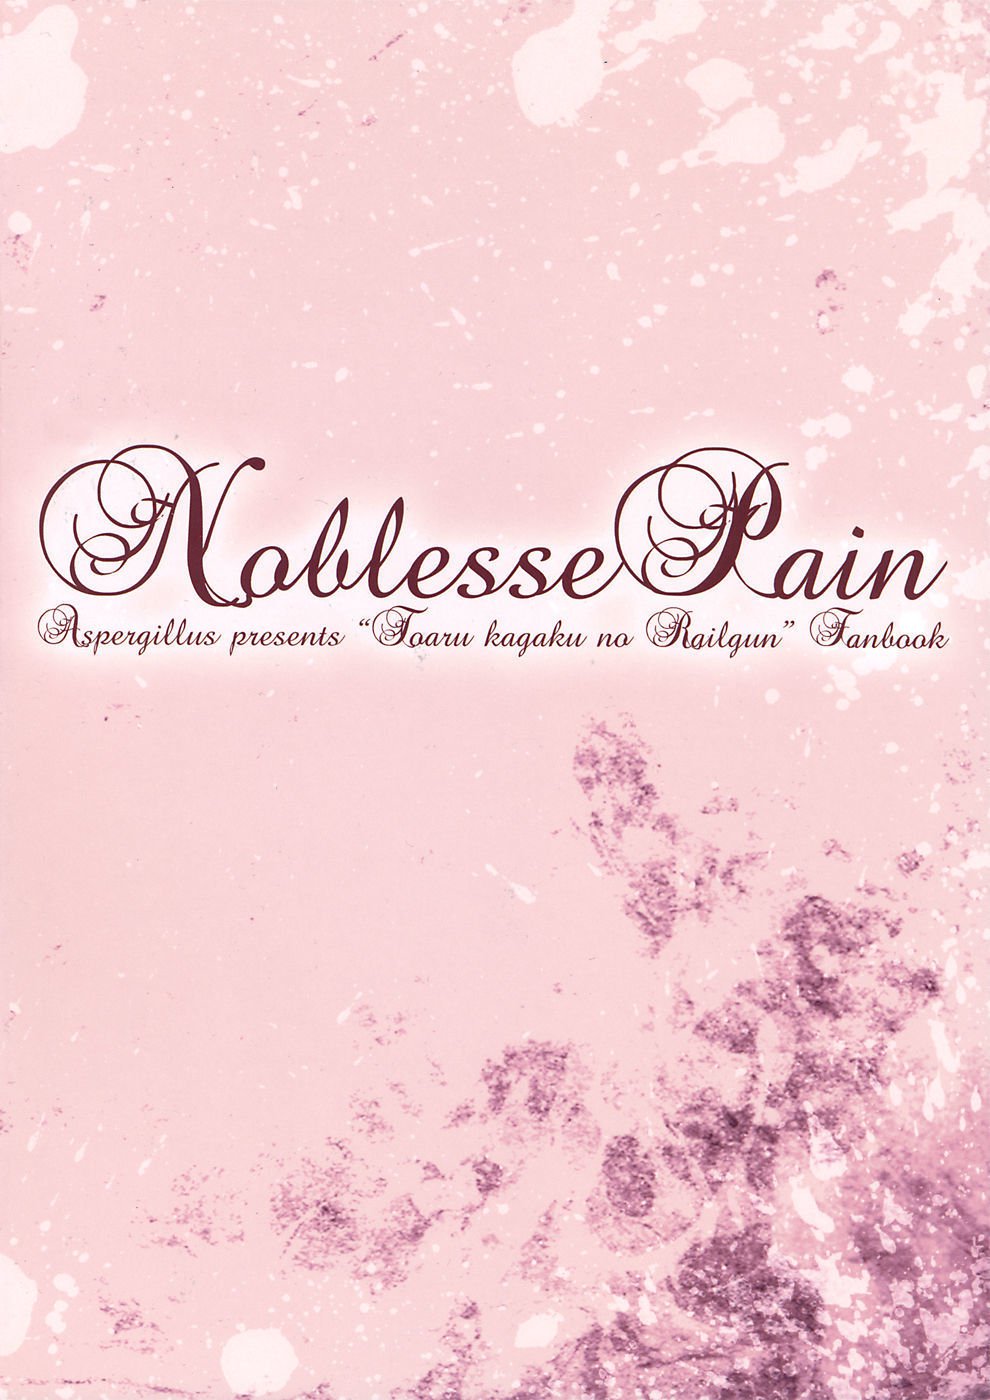 Noblesse Pain